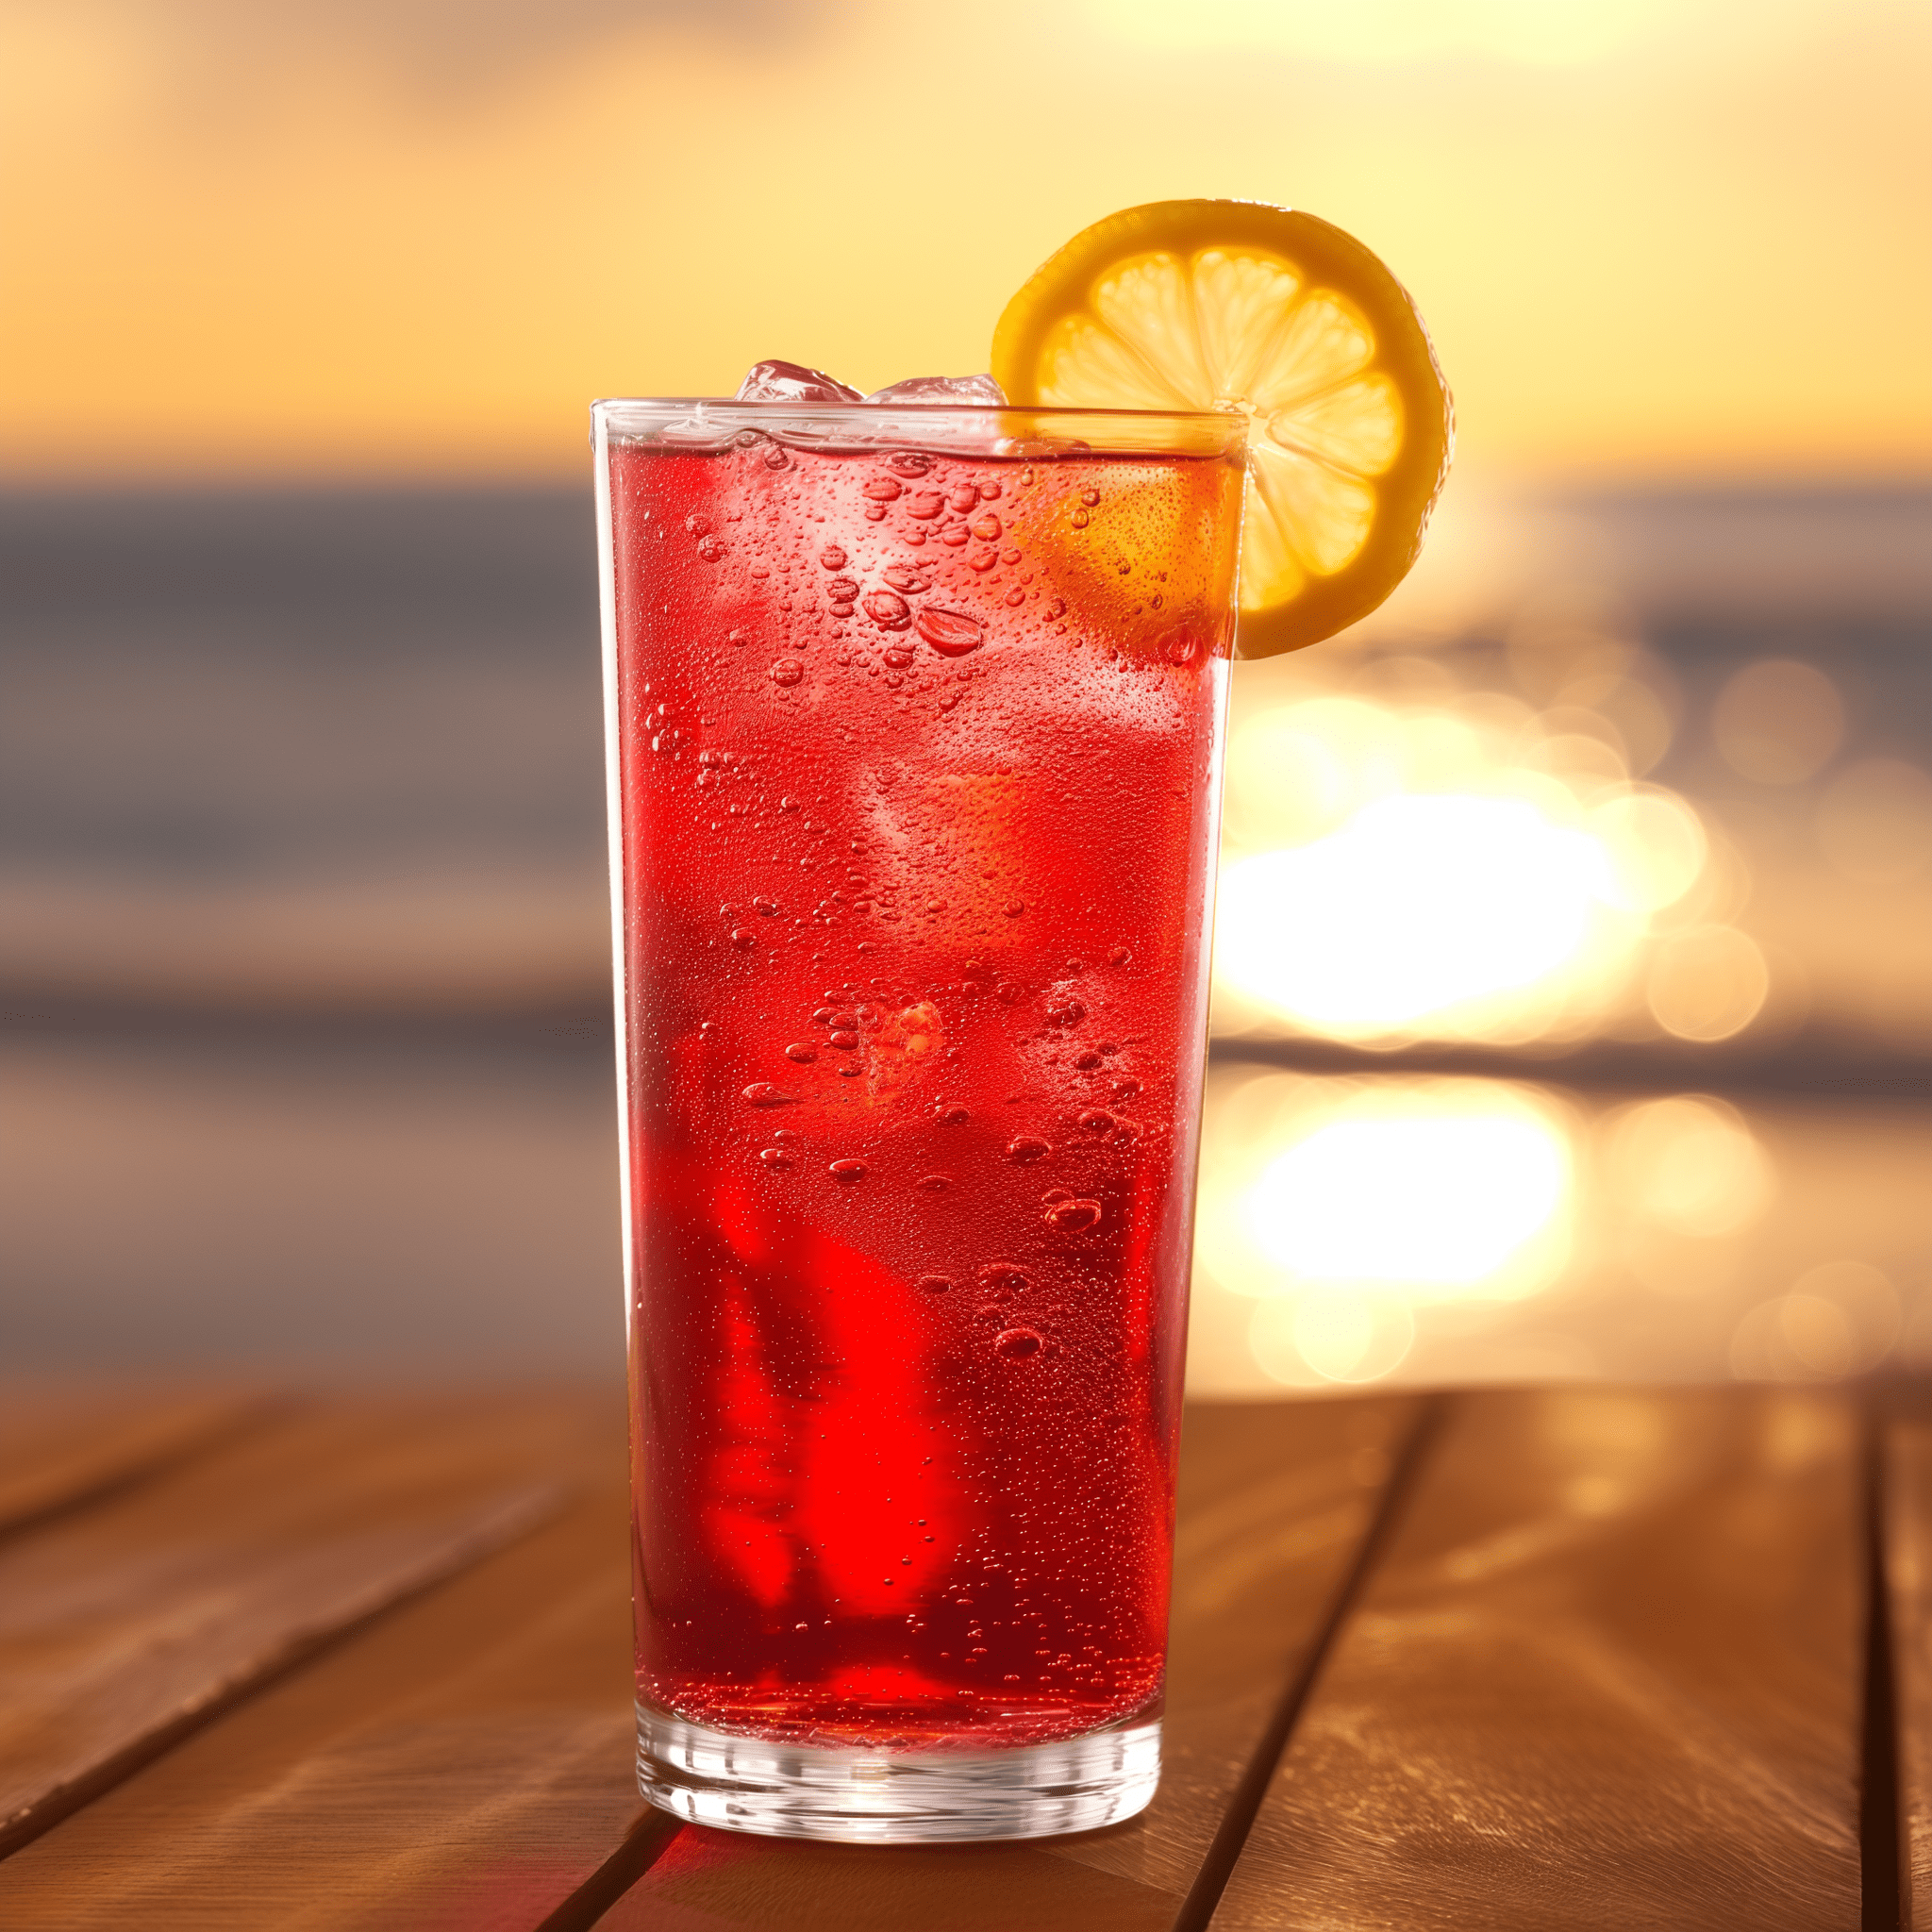 Berry Bomb Cocktail Recipe - The Berry Bomb is sweet and fruity with a fizzy kick from the Sprite. The raspberry vodka adds a tart berry flavor that's balanced by the soda's sweetness. It's a light and effervescent drink that goes down easily.